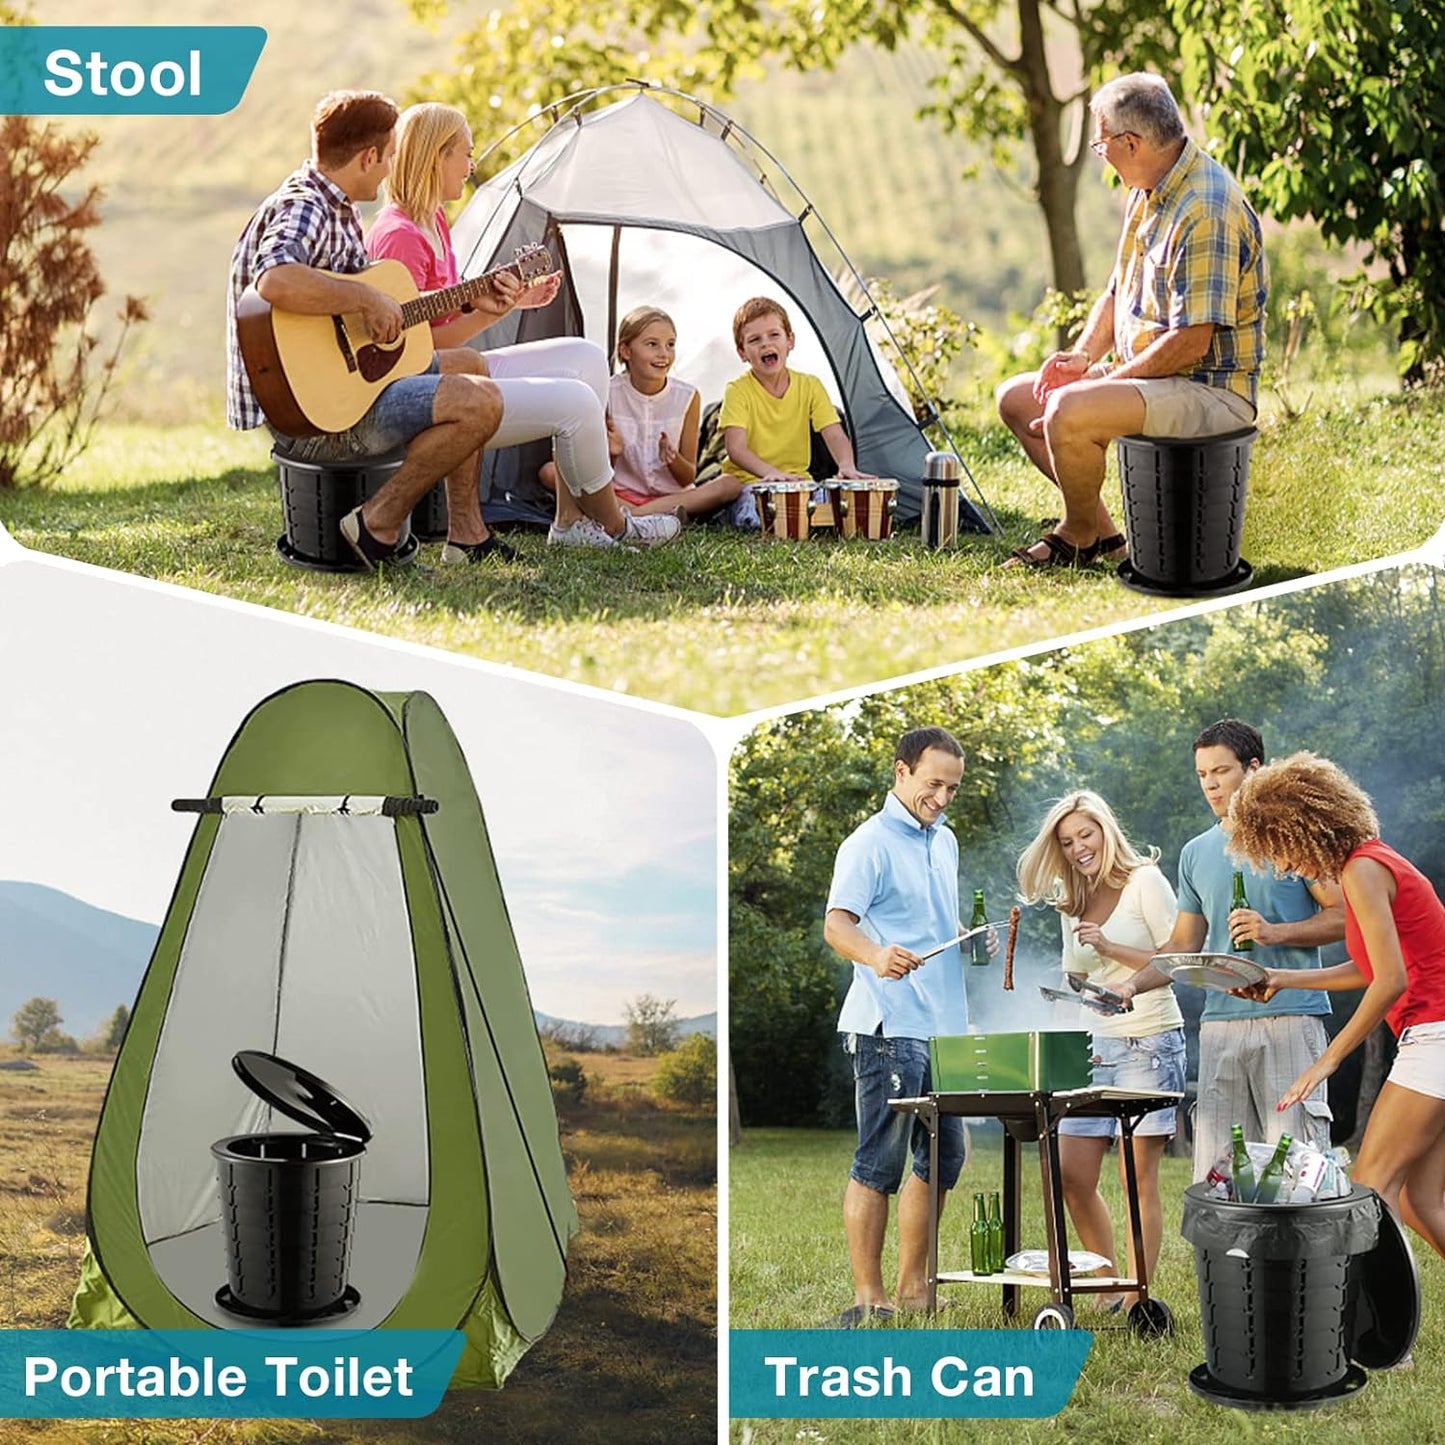 Retractable Portable Toilet Travel Toilet Adjustable Height Camping Toilet Portable Potty for Adults Kids, Foldable Portable Toilet for Camping/Car, XL Size